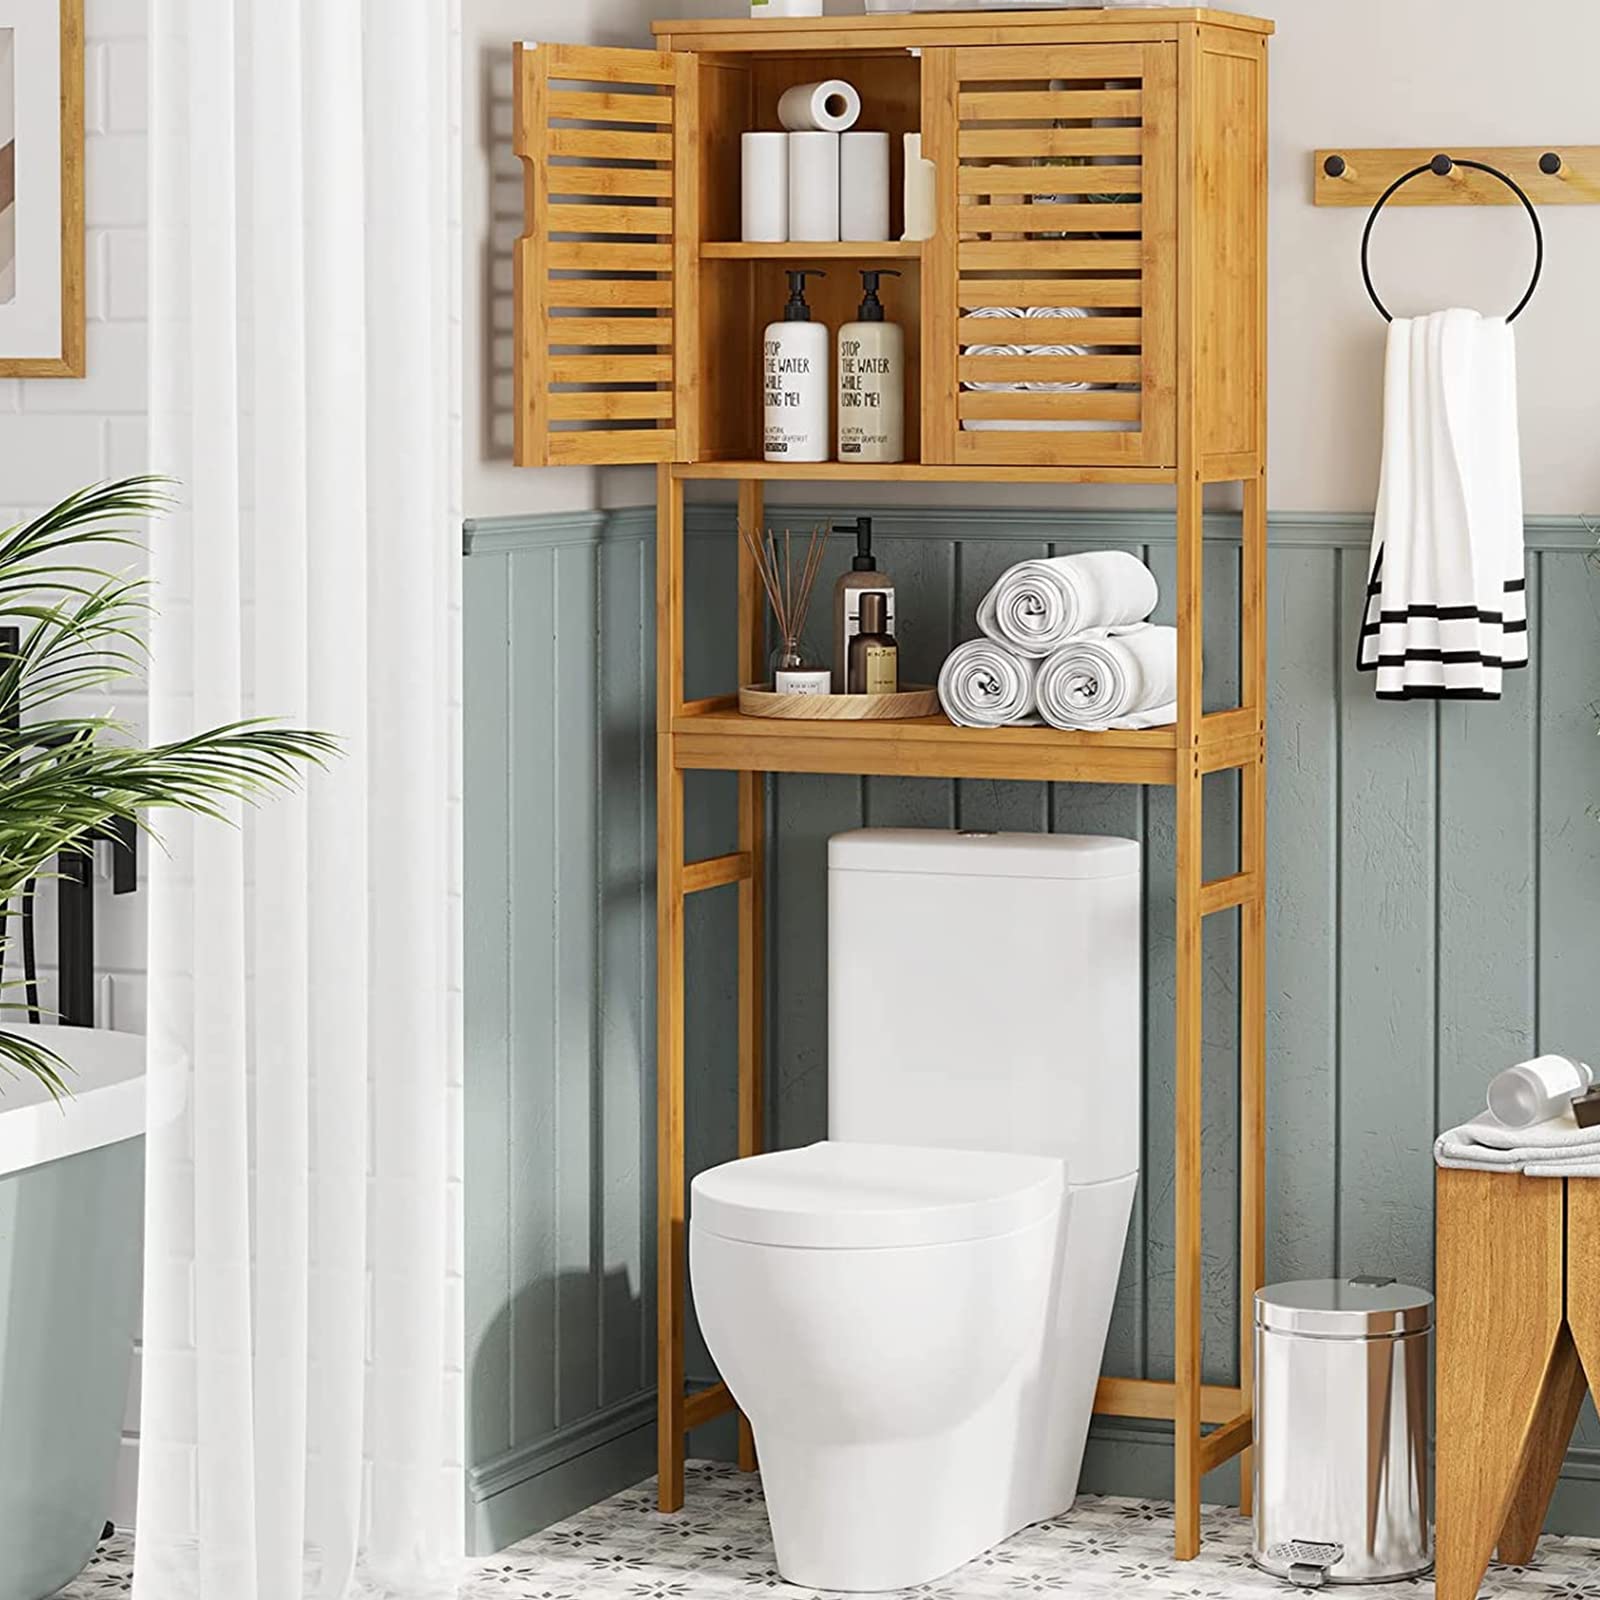 What To Put On Over The Toilet Shelf